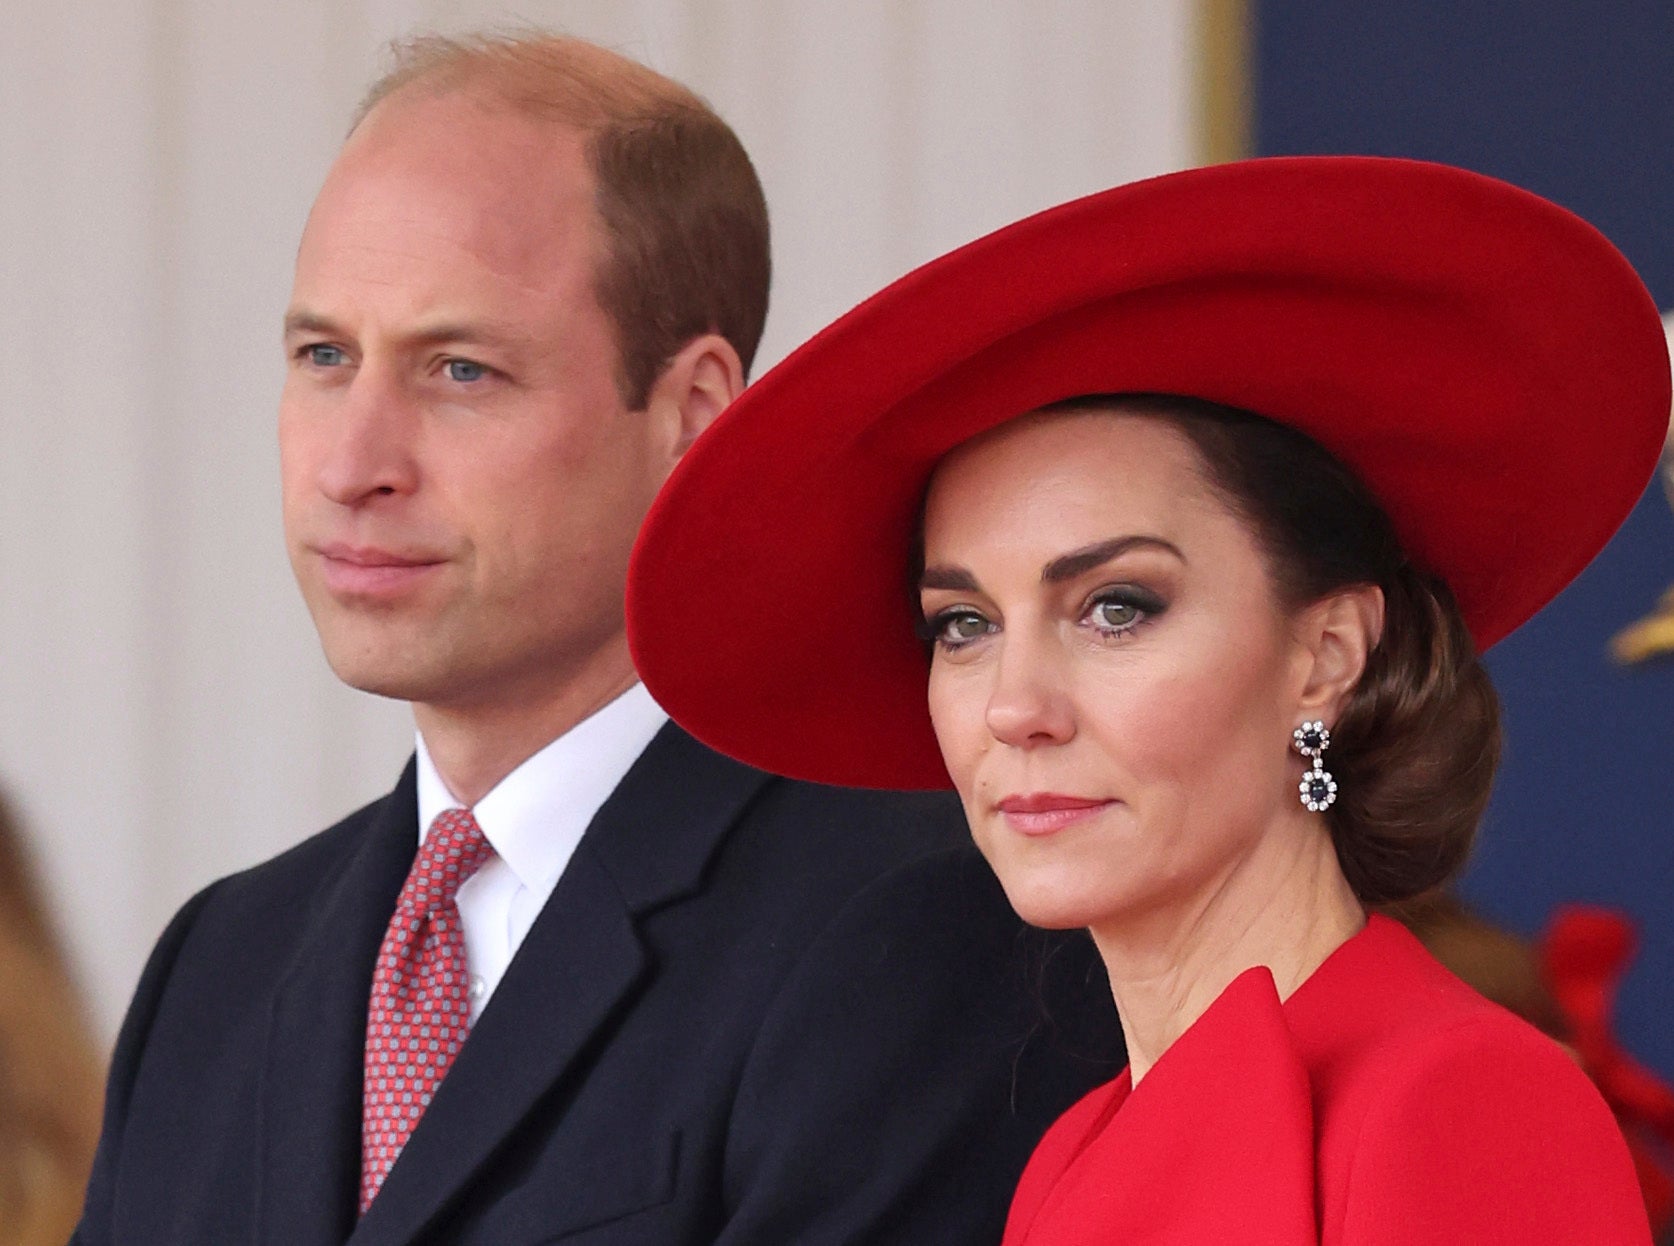 The Royals Provide Health Update on Kate Middleton as Online Curiosity Grows